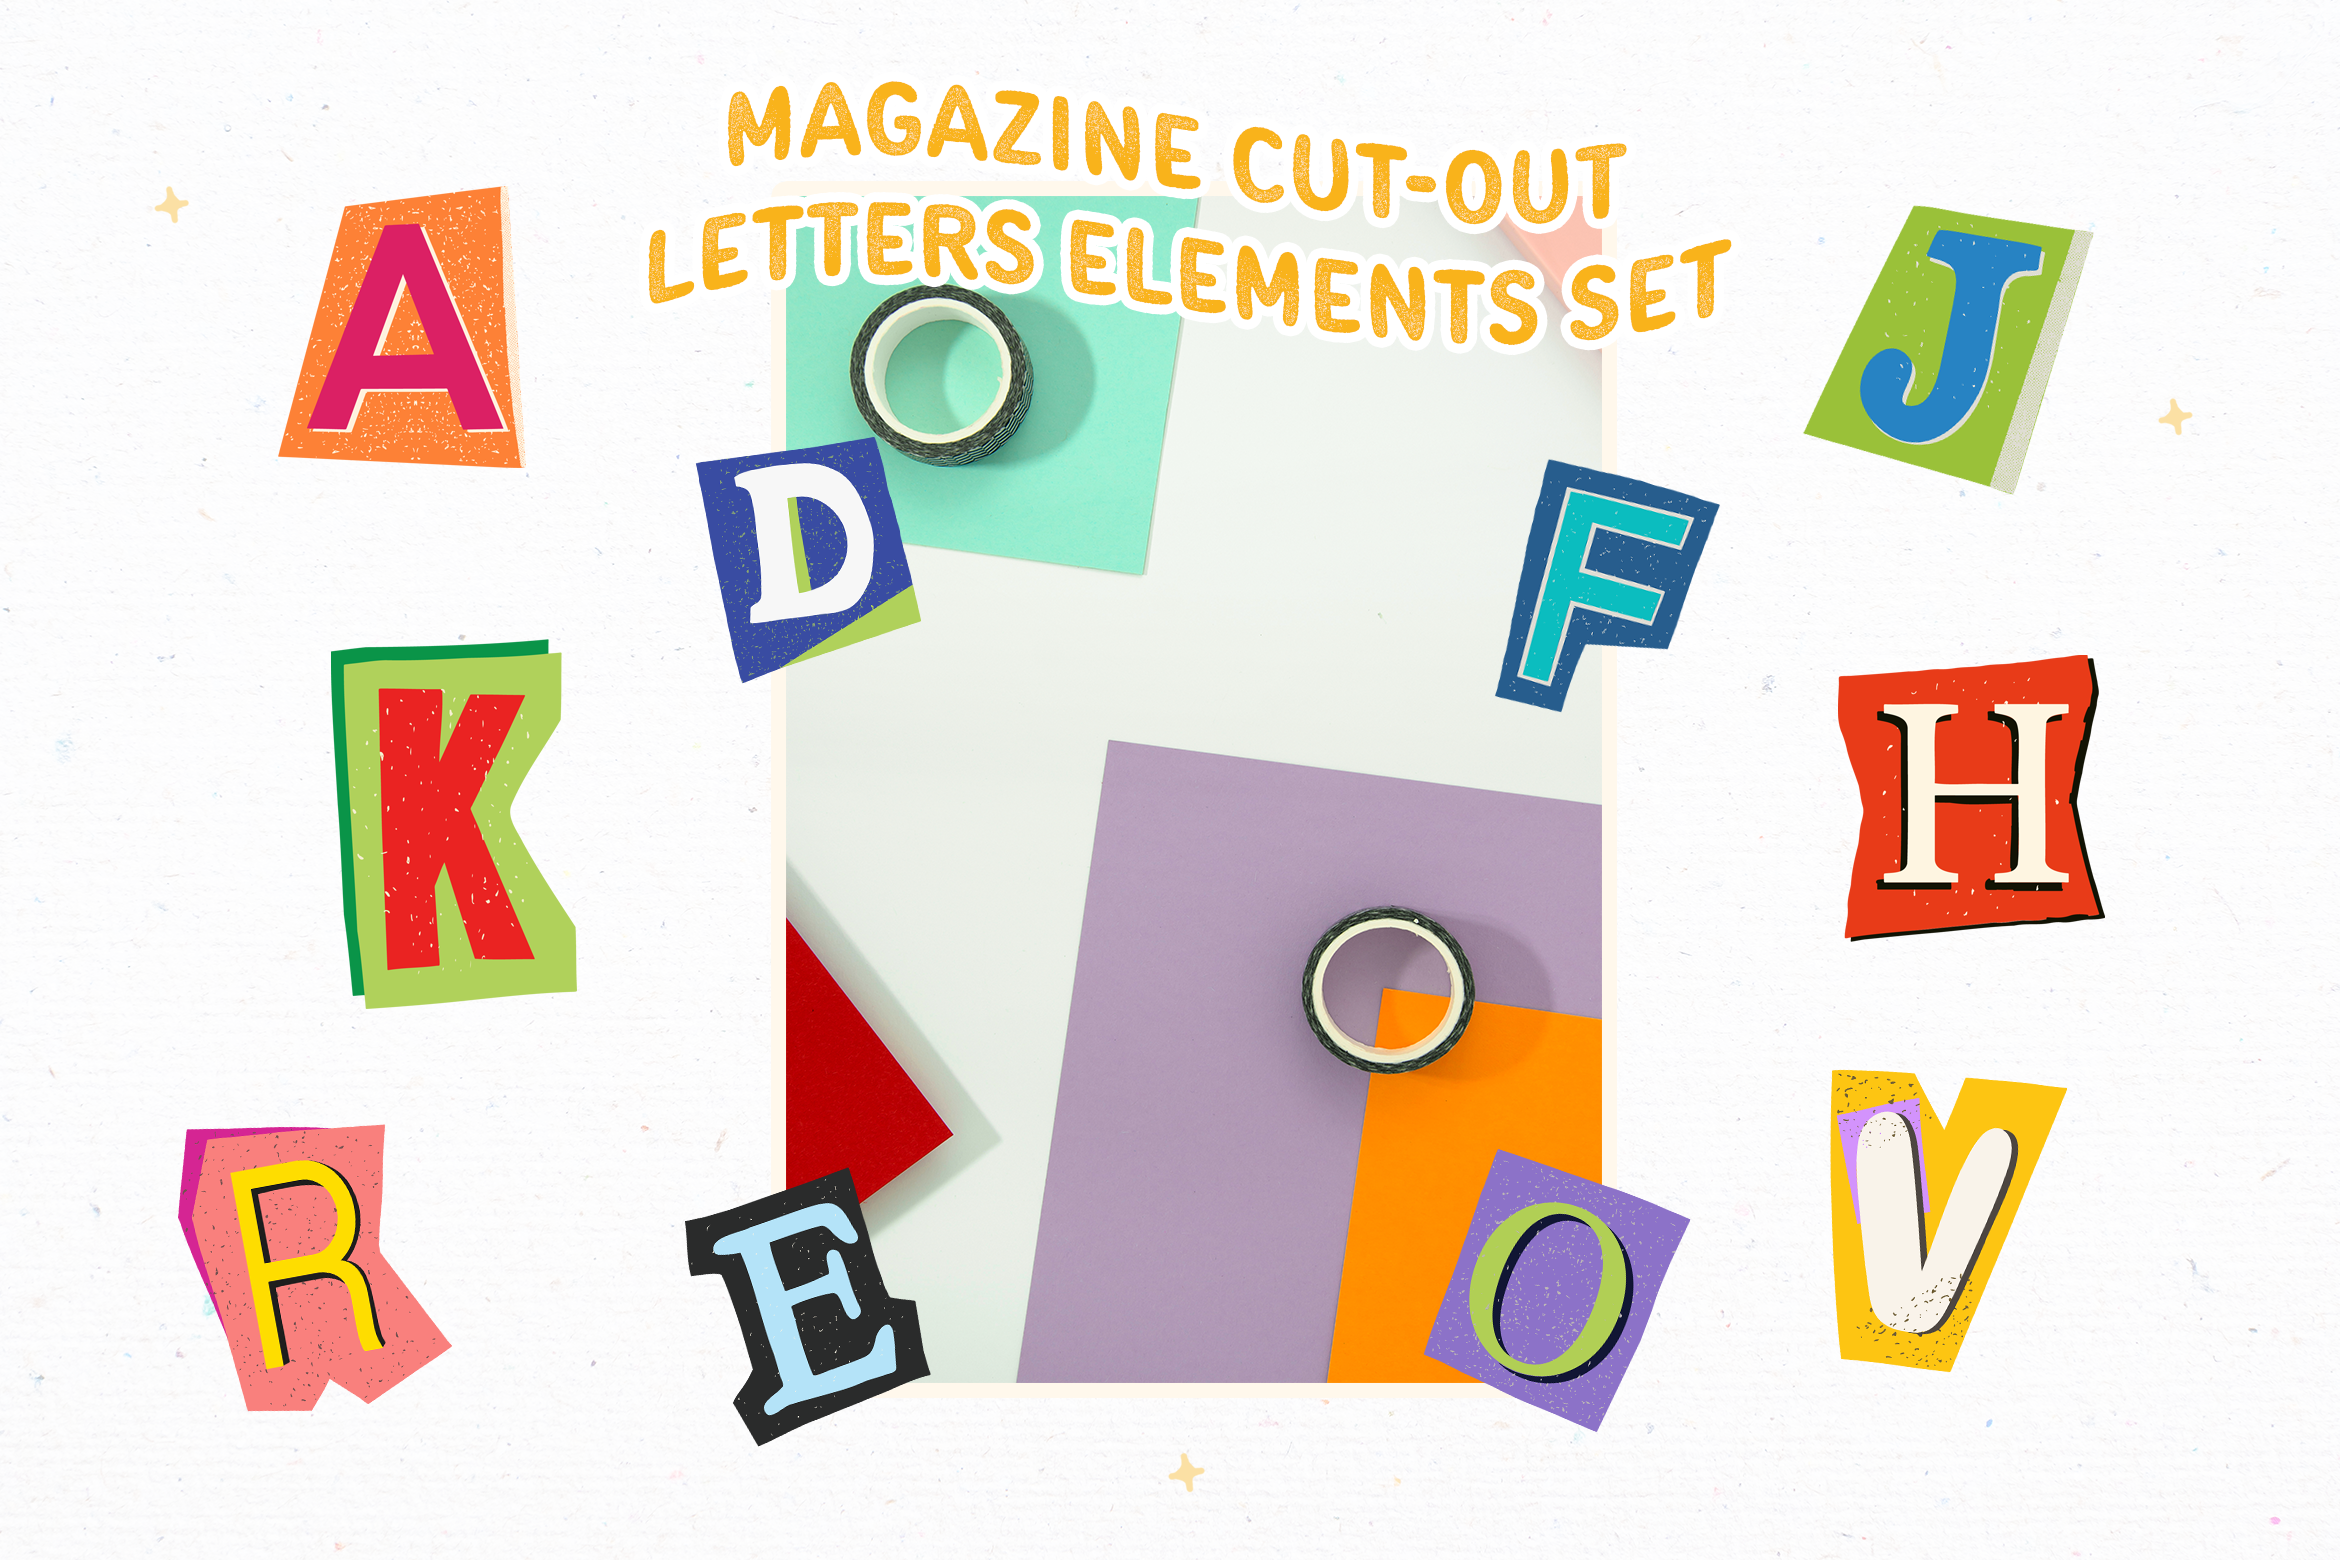 https://peterdraw.studio/wp-content/uploads/2023/03/Colorful-Magazine-Cut-out-Letters-Elements-Set-with-Red-Orange-Pink-Yellow-Green-Blue-White-Light-Blue-and-Purple-colors-5.png